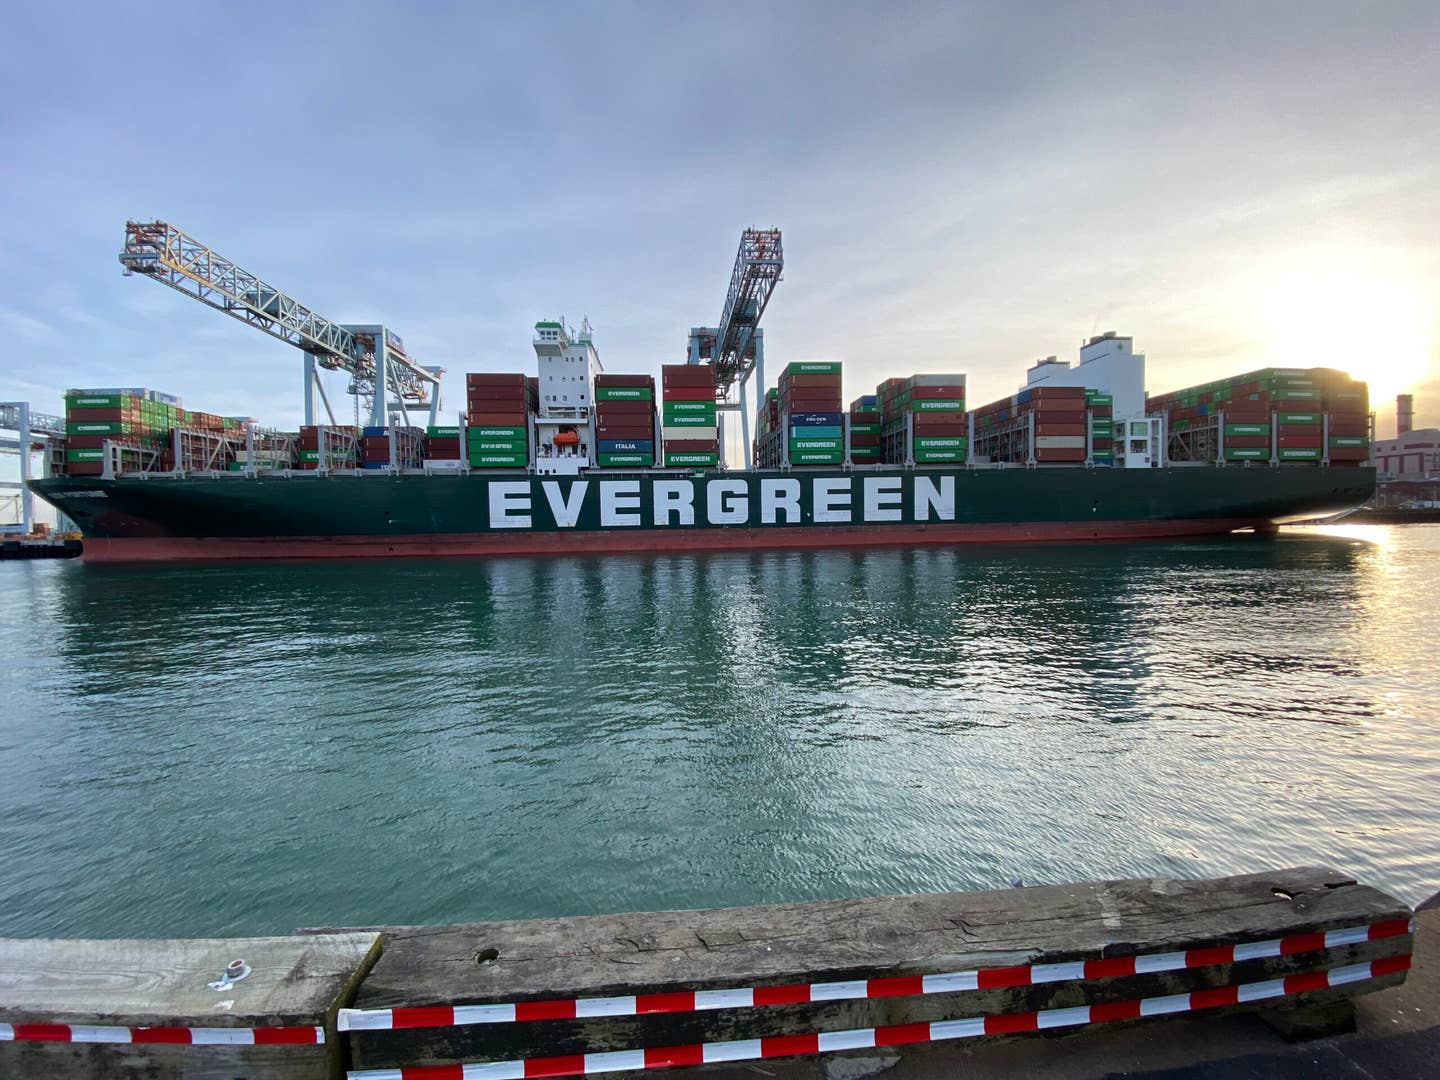 Container ship <em>Ever Fortune</em>, an example of the types of vessels that transit the Boston Harbor. <em>Credit: ArnoldReinhold/Wikimedia Commons</em>